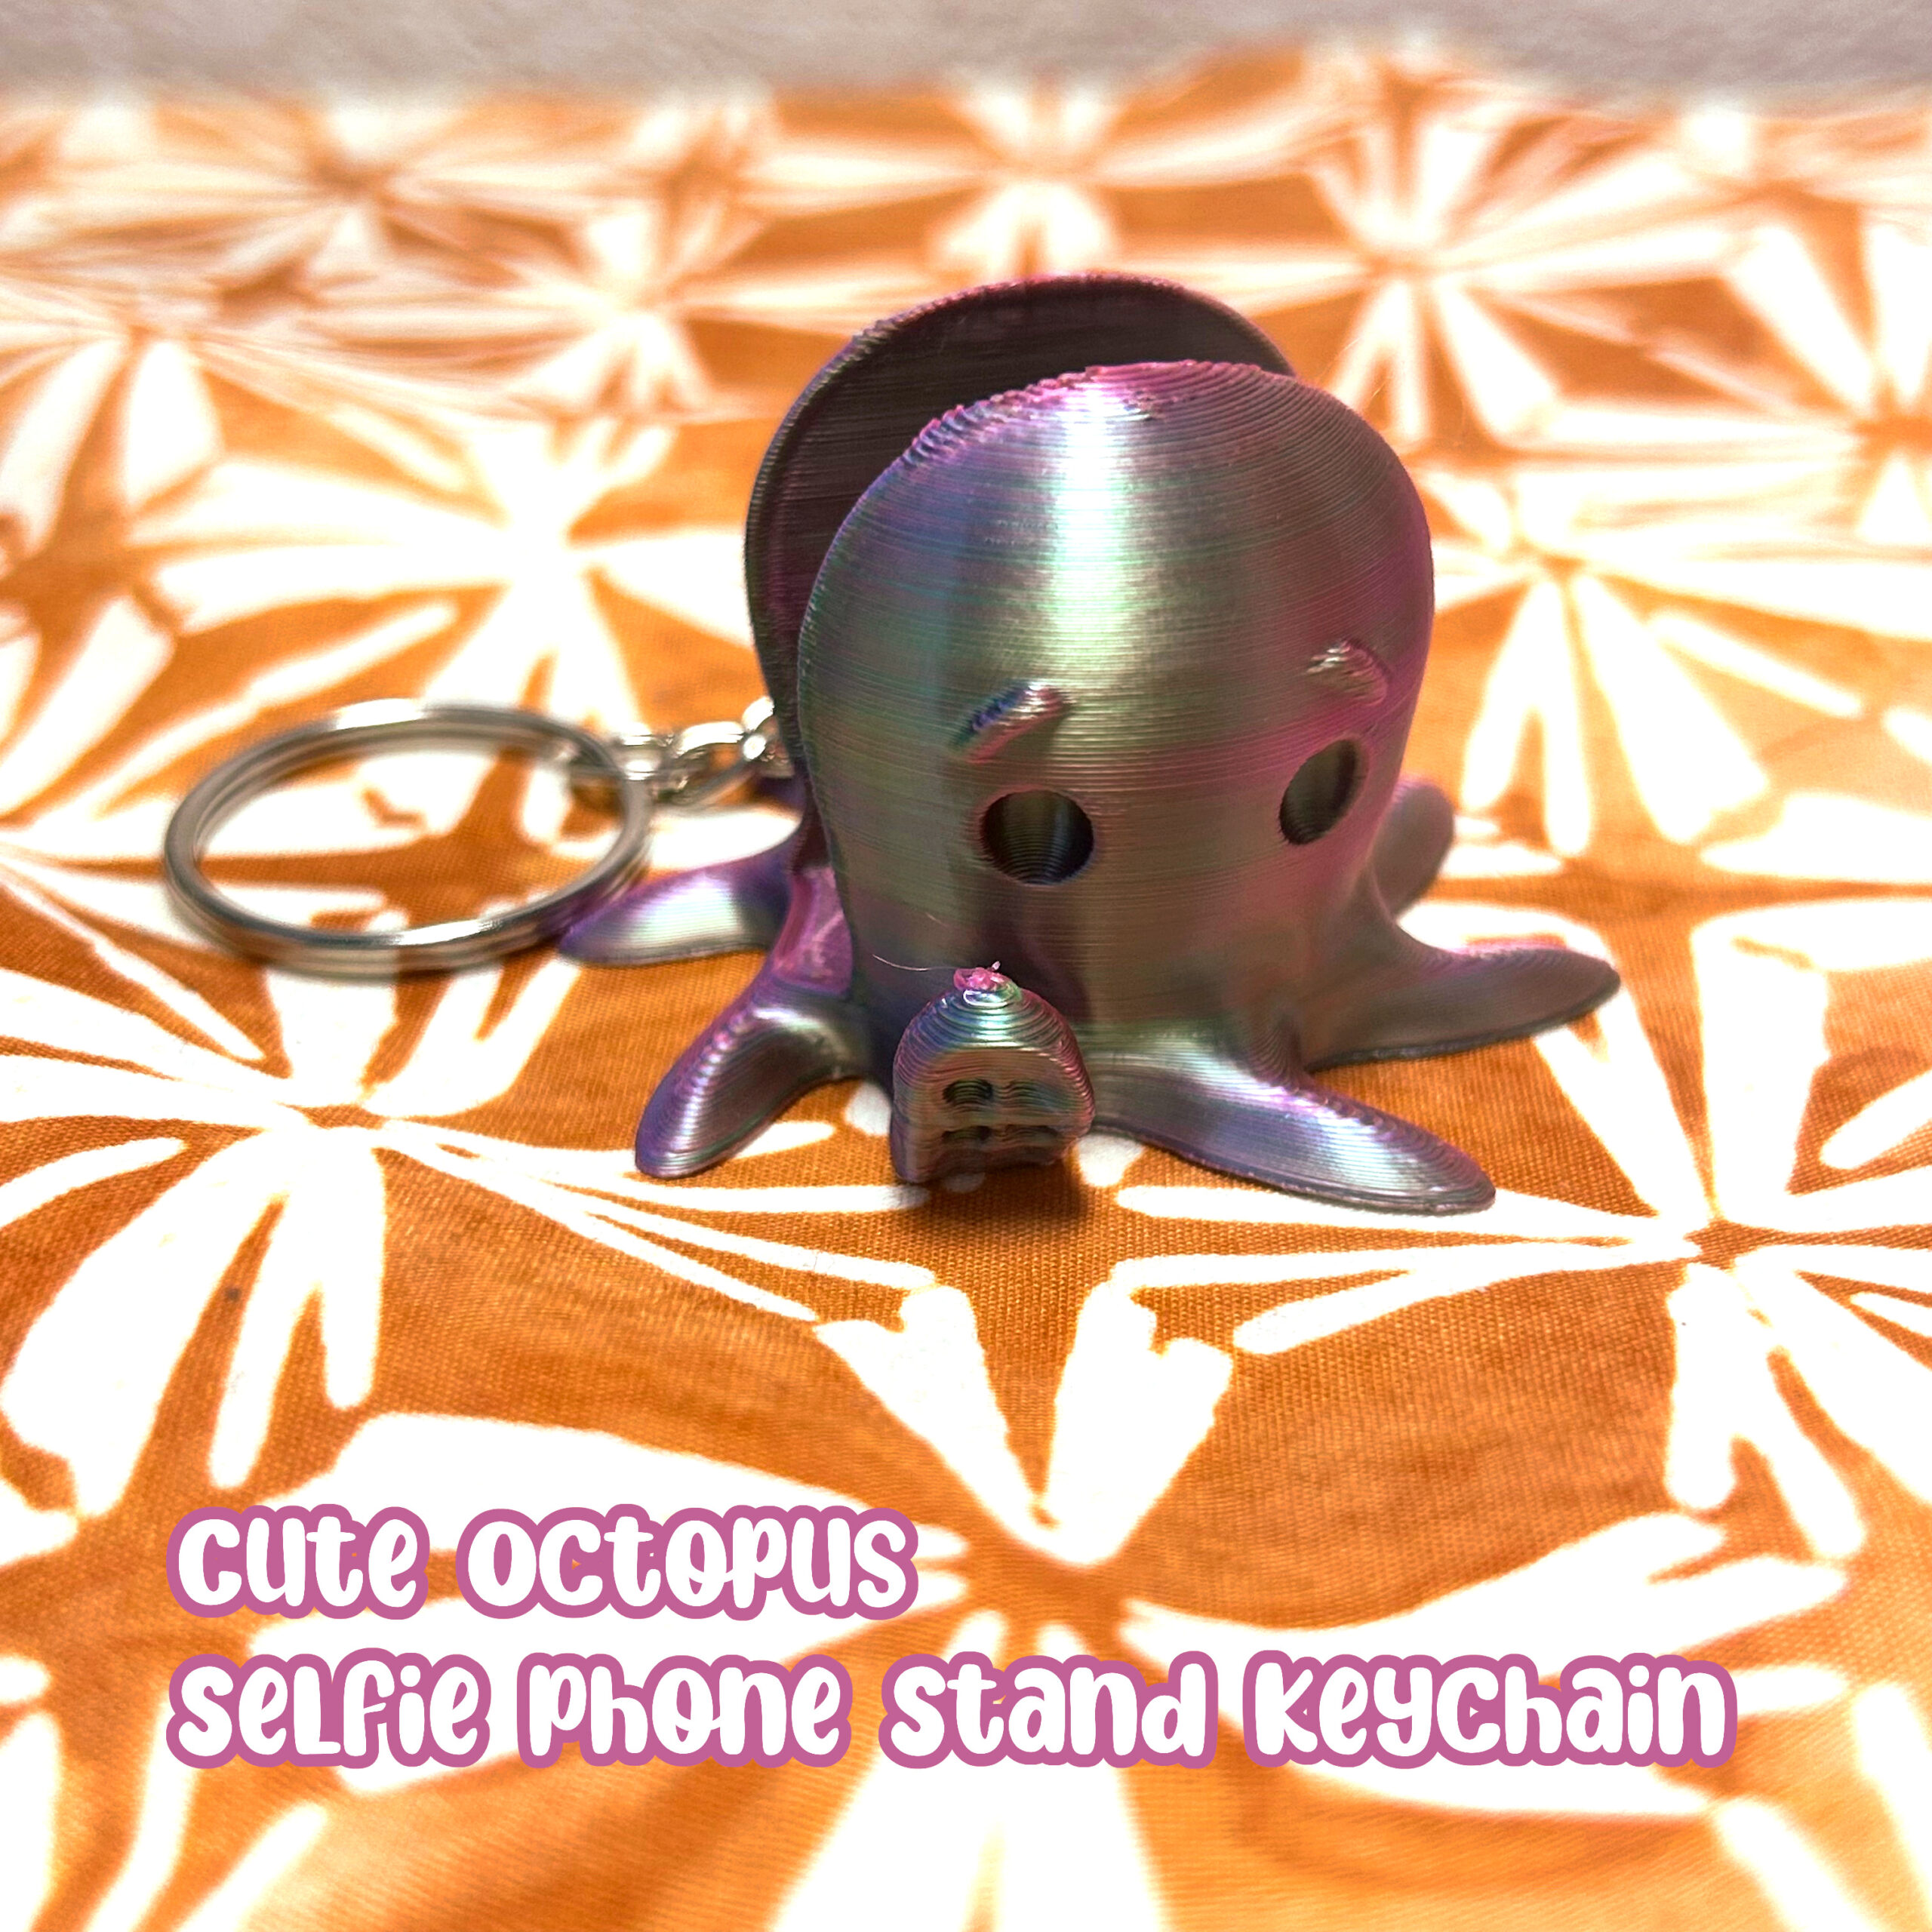 Cute Octopus Says Hello Selfie Phone Stand Keychain